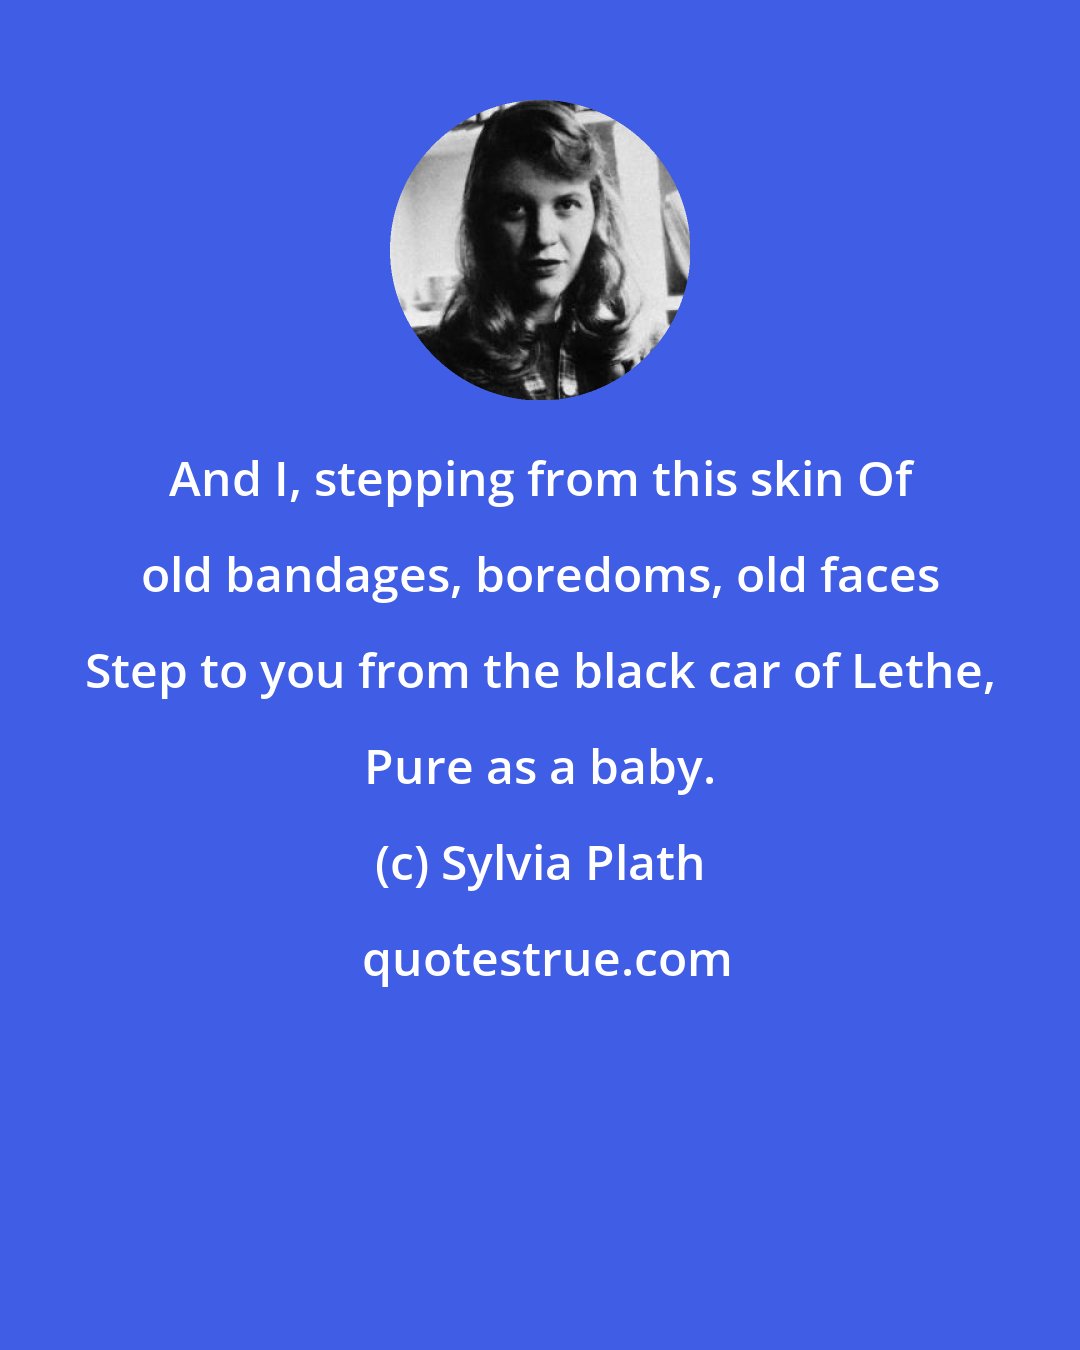 Sylvia Plath: And I, stepping from this skin Of old bandages, boredoms, old faces Step to you from the black car of Lethe, Pure as a baby.